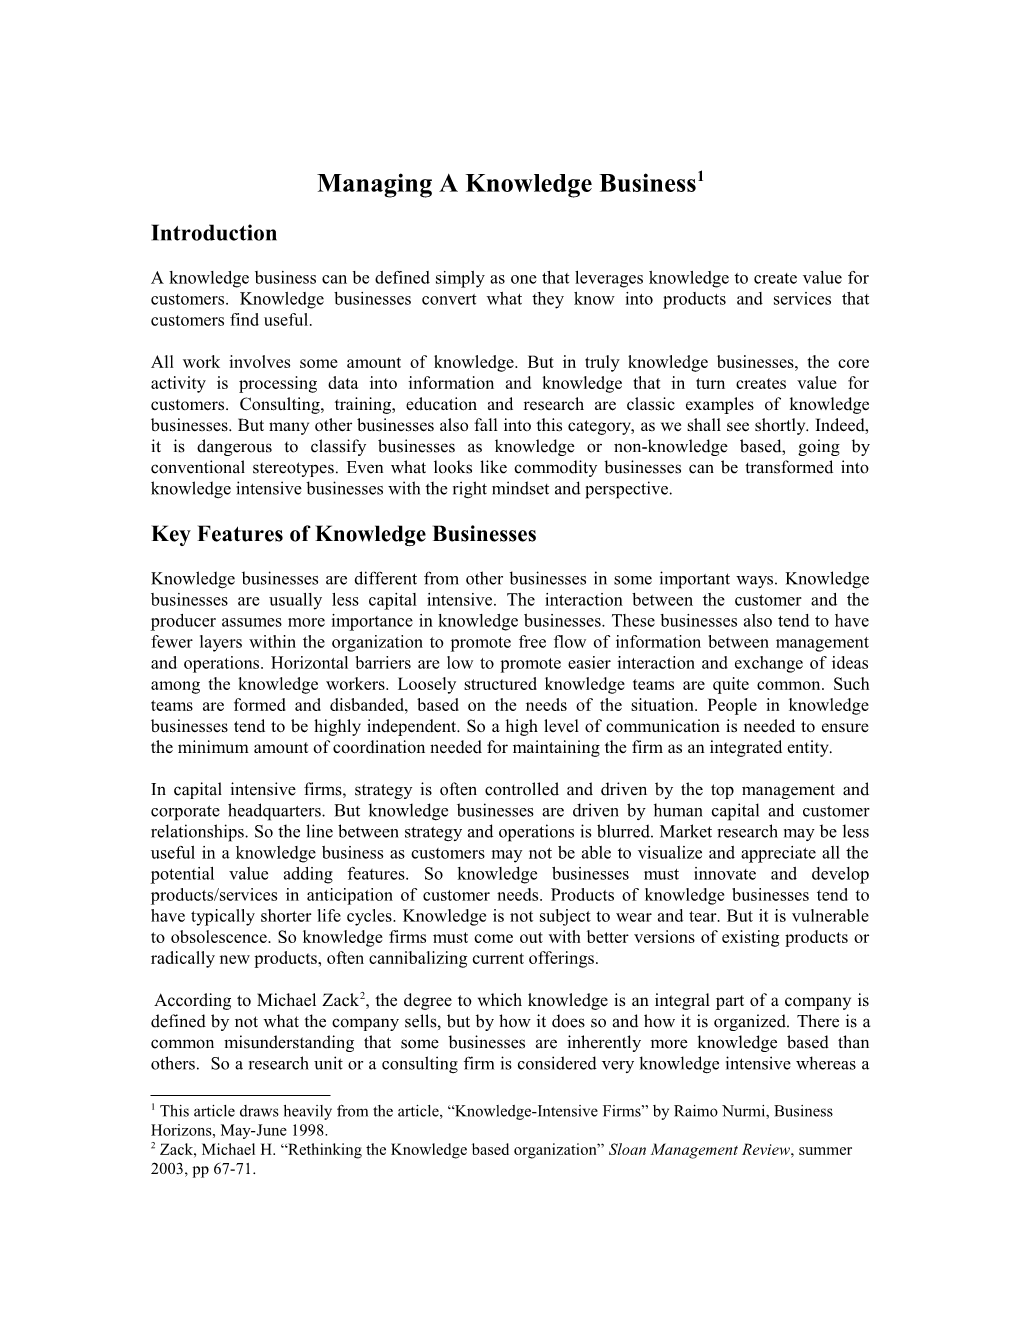 Managing a Knowledge Business